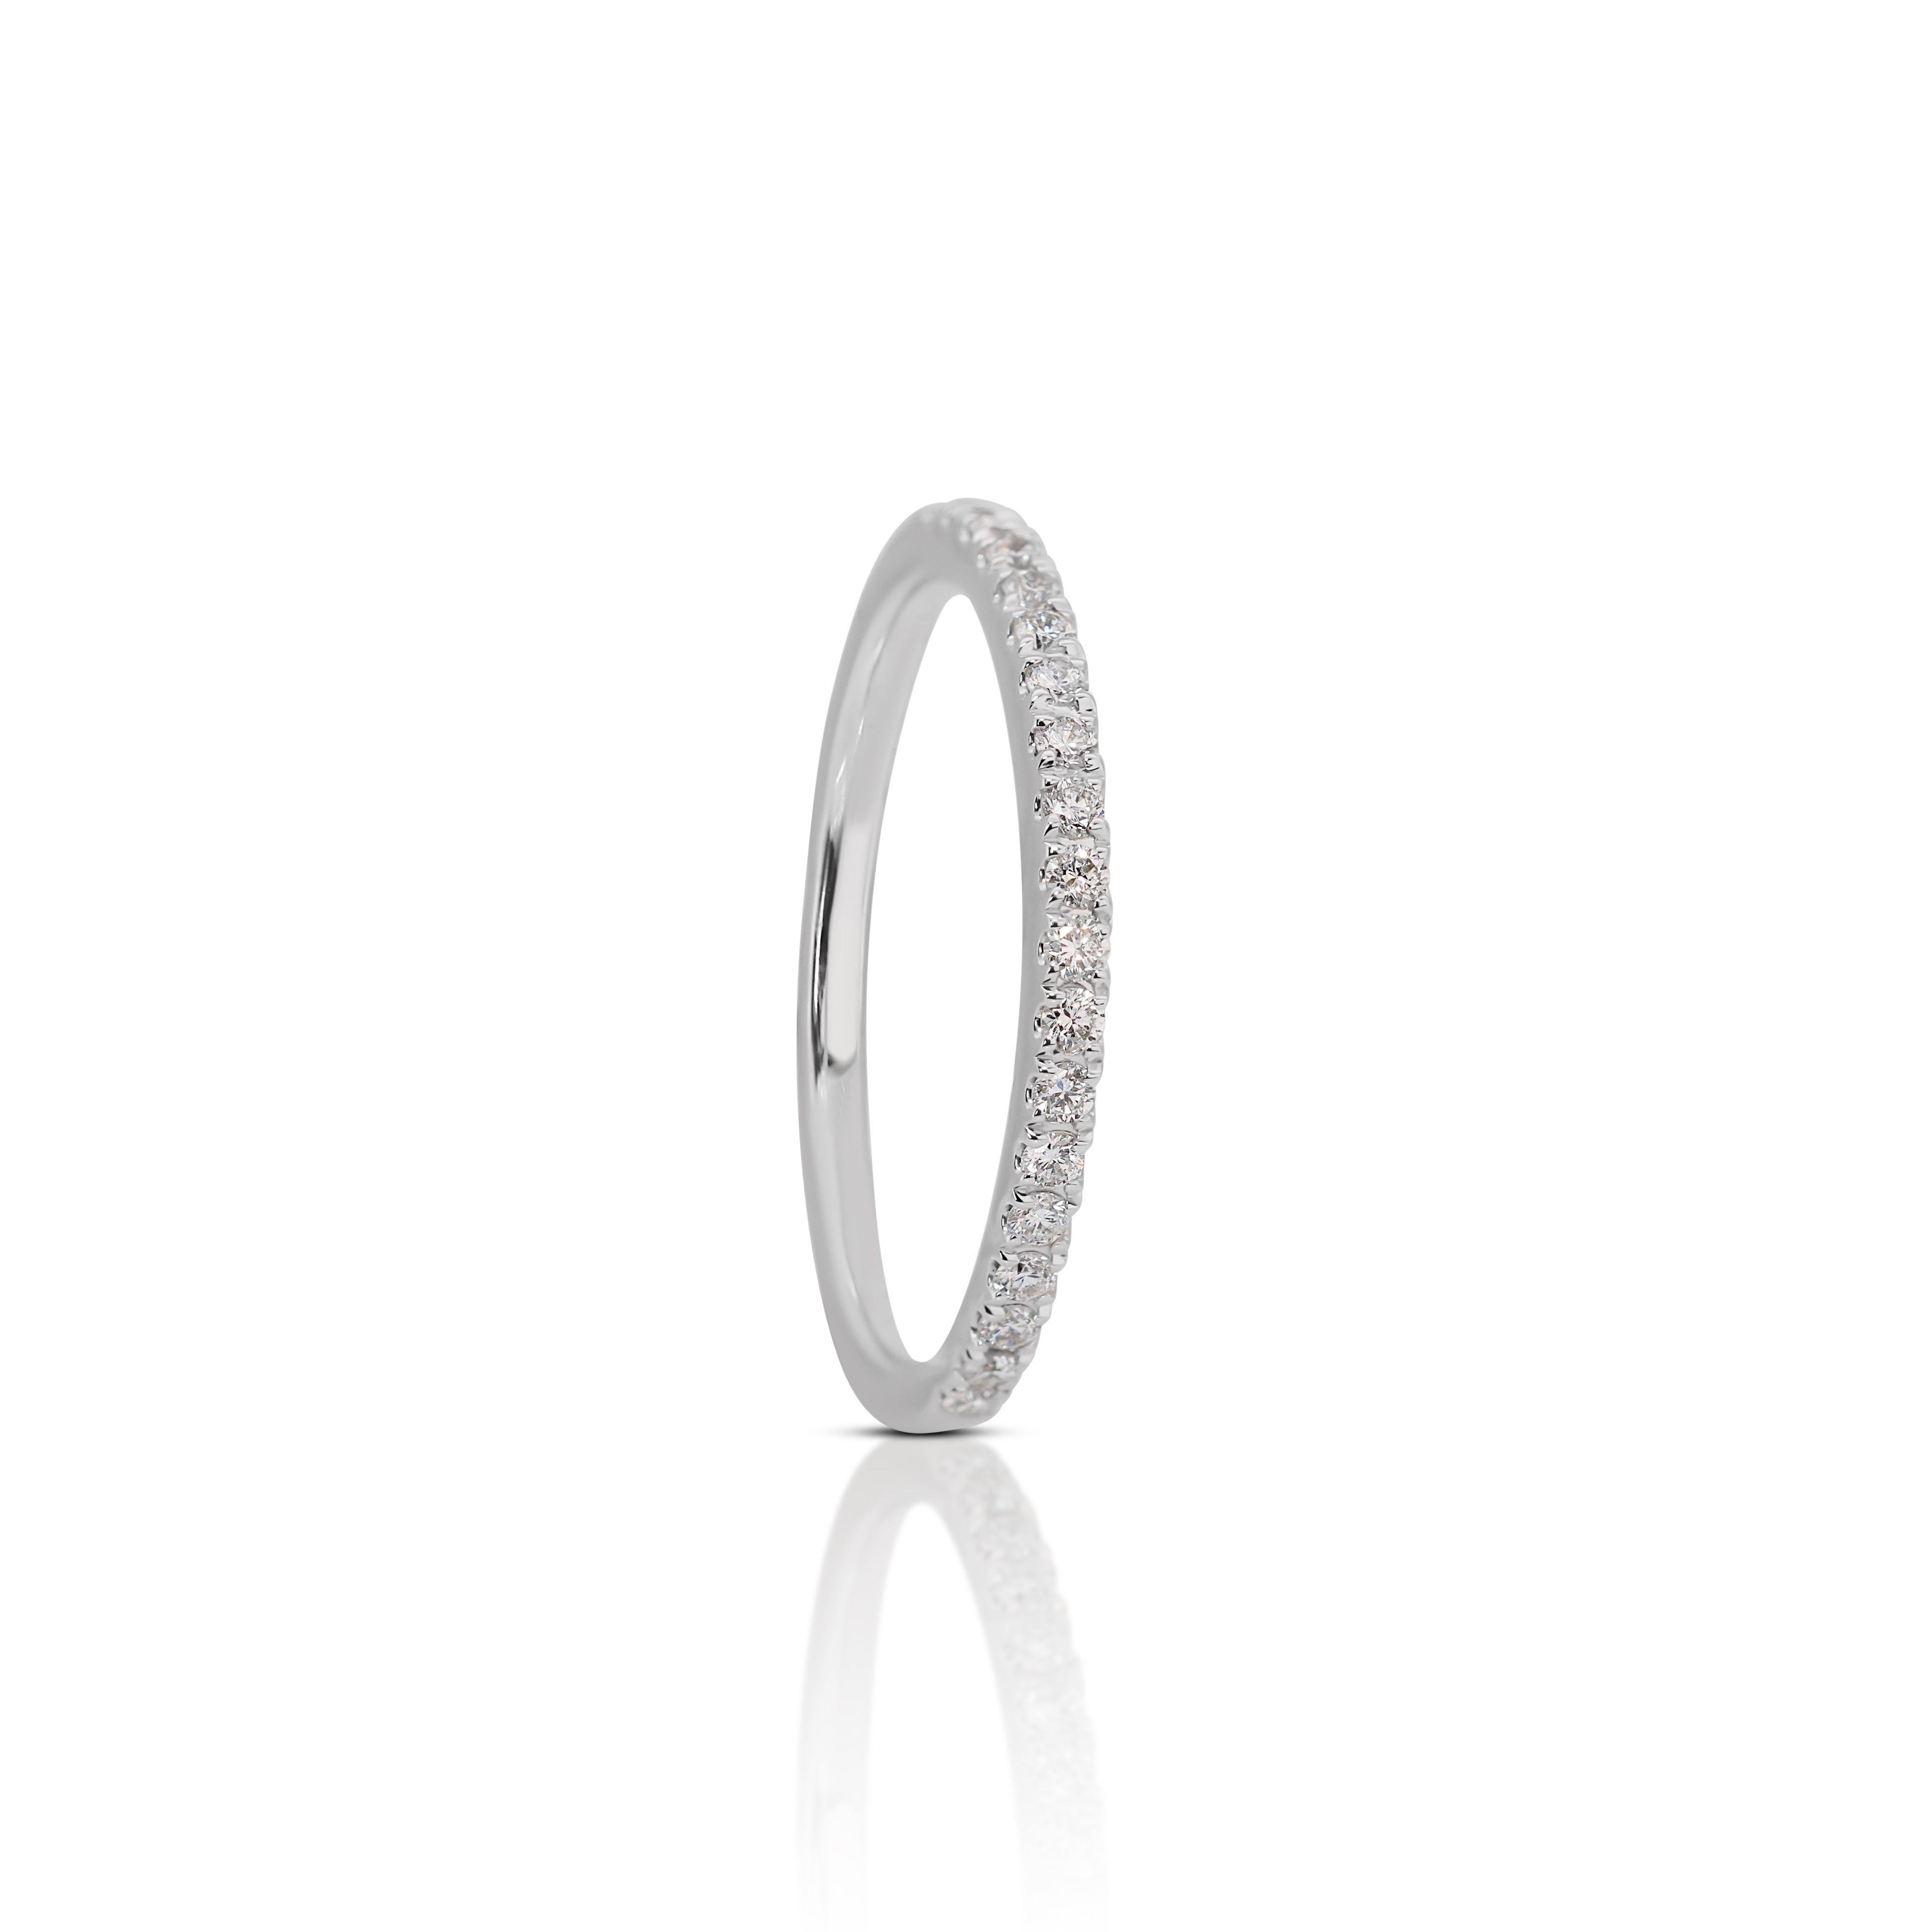 Exquisite 18K White Gold  Eternity Diamond Ring in 0.15ct Natural Diamond For Sale 1